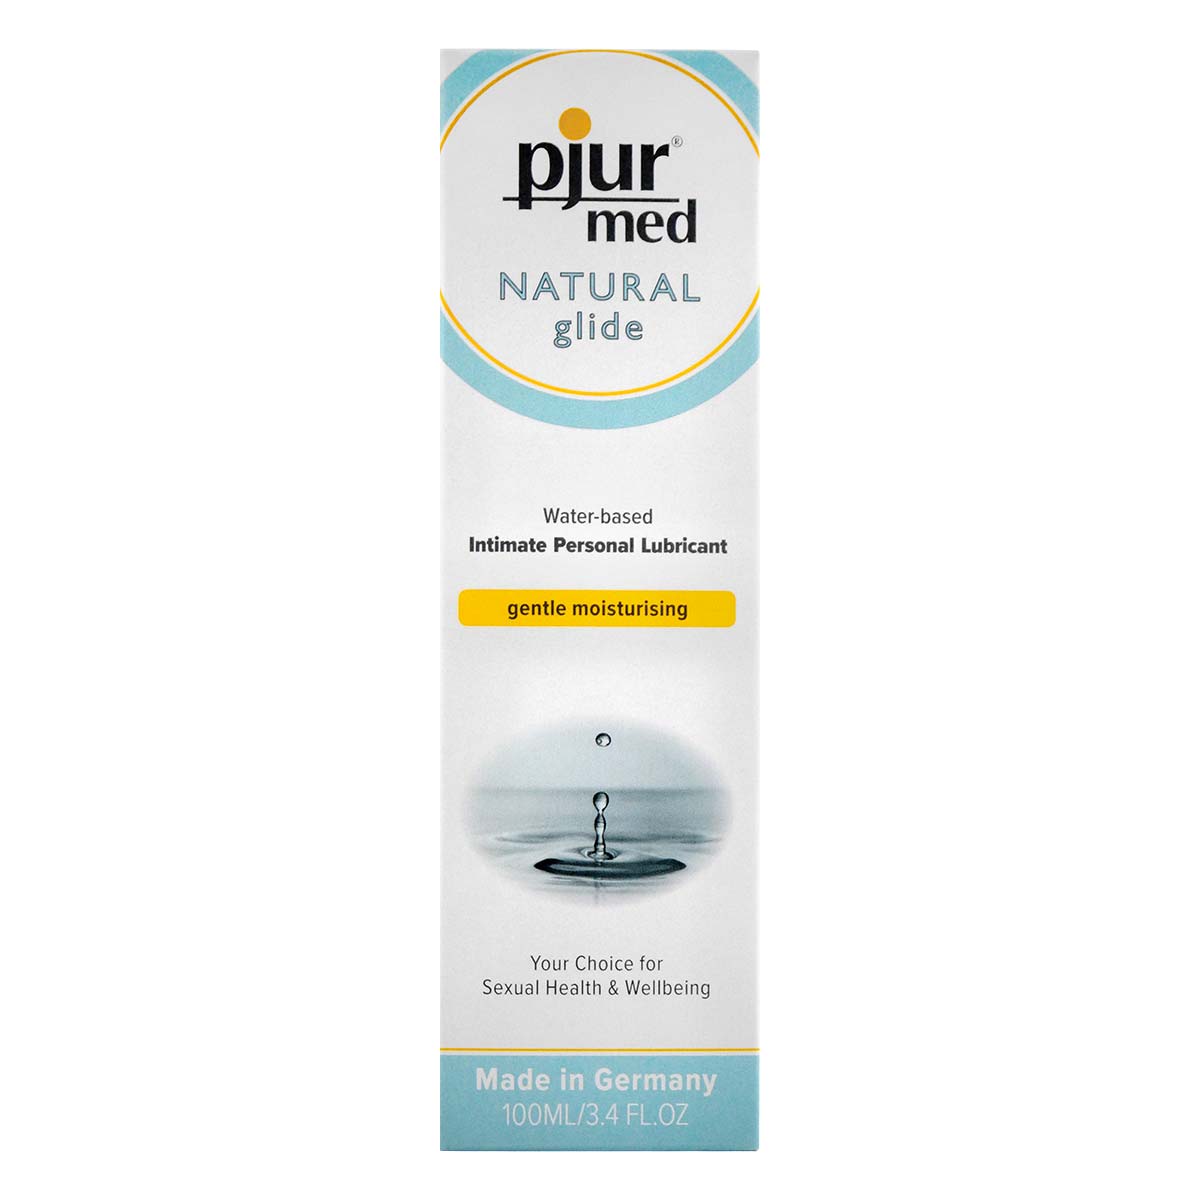 pjur med NATURAL glide 100ml Water-based Lubricant-thumb_2